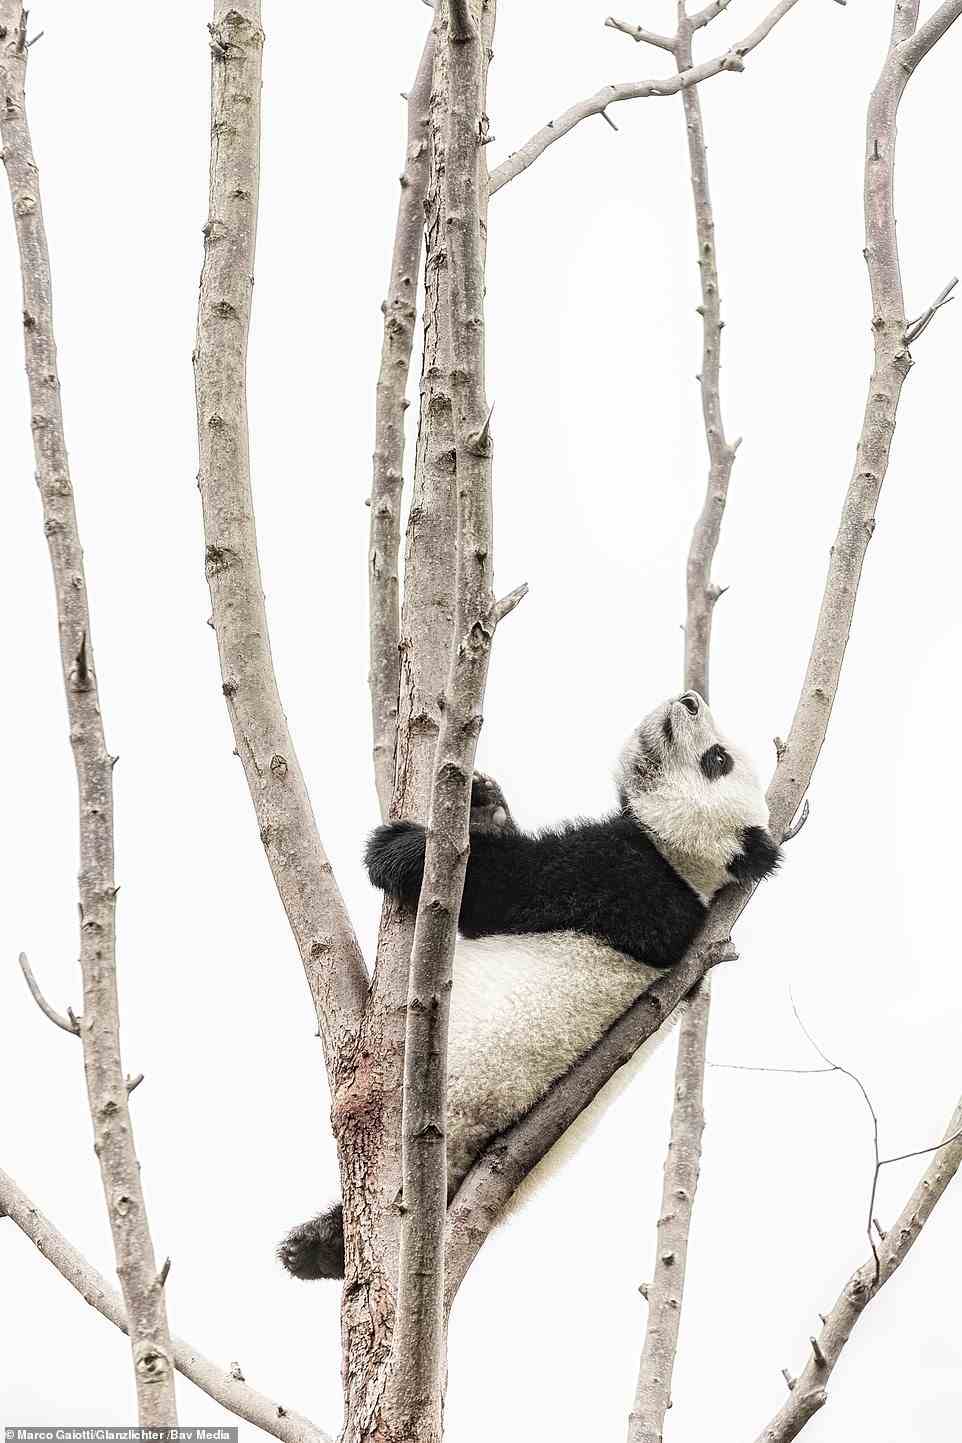 An impressive second entry by Italian photographer Marco Gaiotti, this photo of a giant panda at the Wolong Nature Reserve in China was a runner-up in Glanzlichter's World of Mammals section. The panda is resting comfortably despite leaning on a small branch high up the tree, showing its familiarity and comfort with its environment. That's no surprise: the Wolong Nature Reserve is home to one tenth of the world's giant pandas.